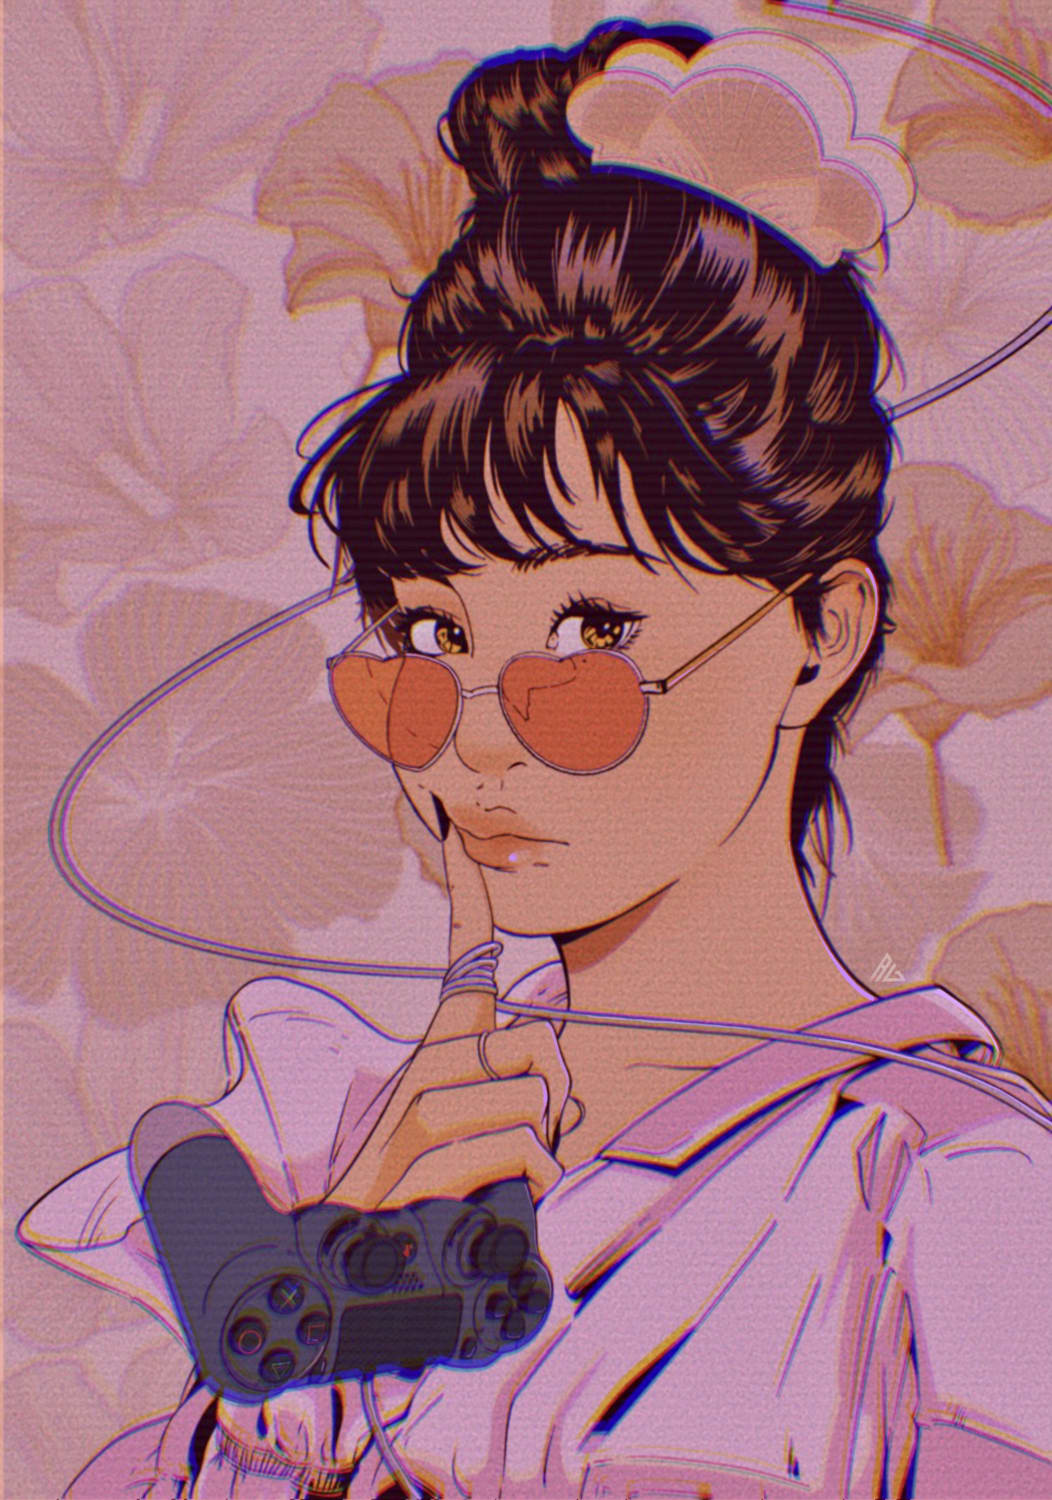 I drew a portrait with a 90's anime aesthetic, hope it fits here!